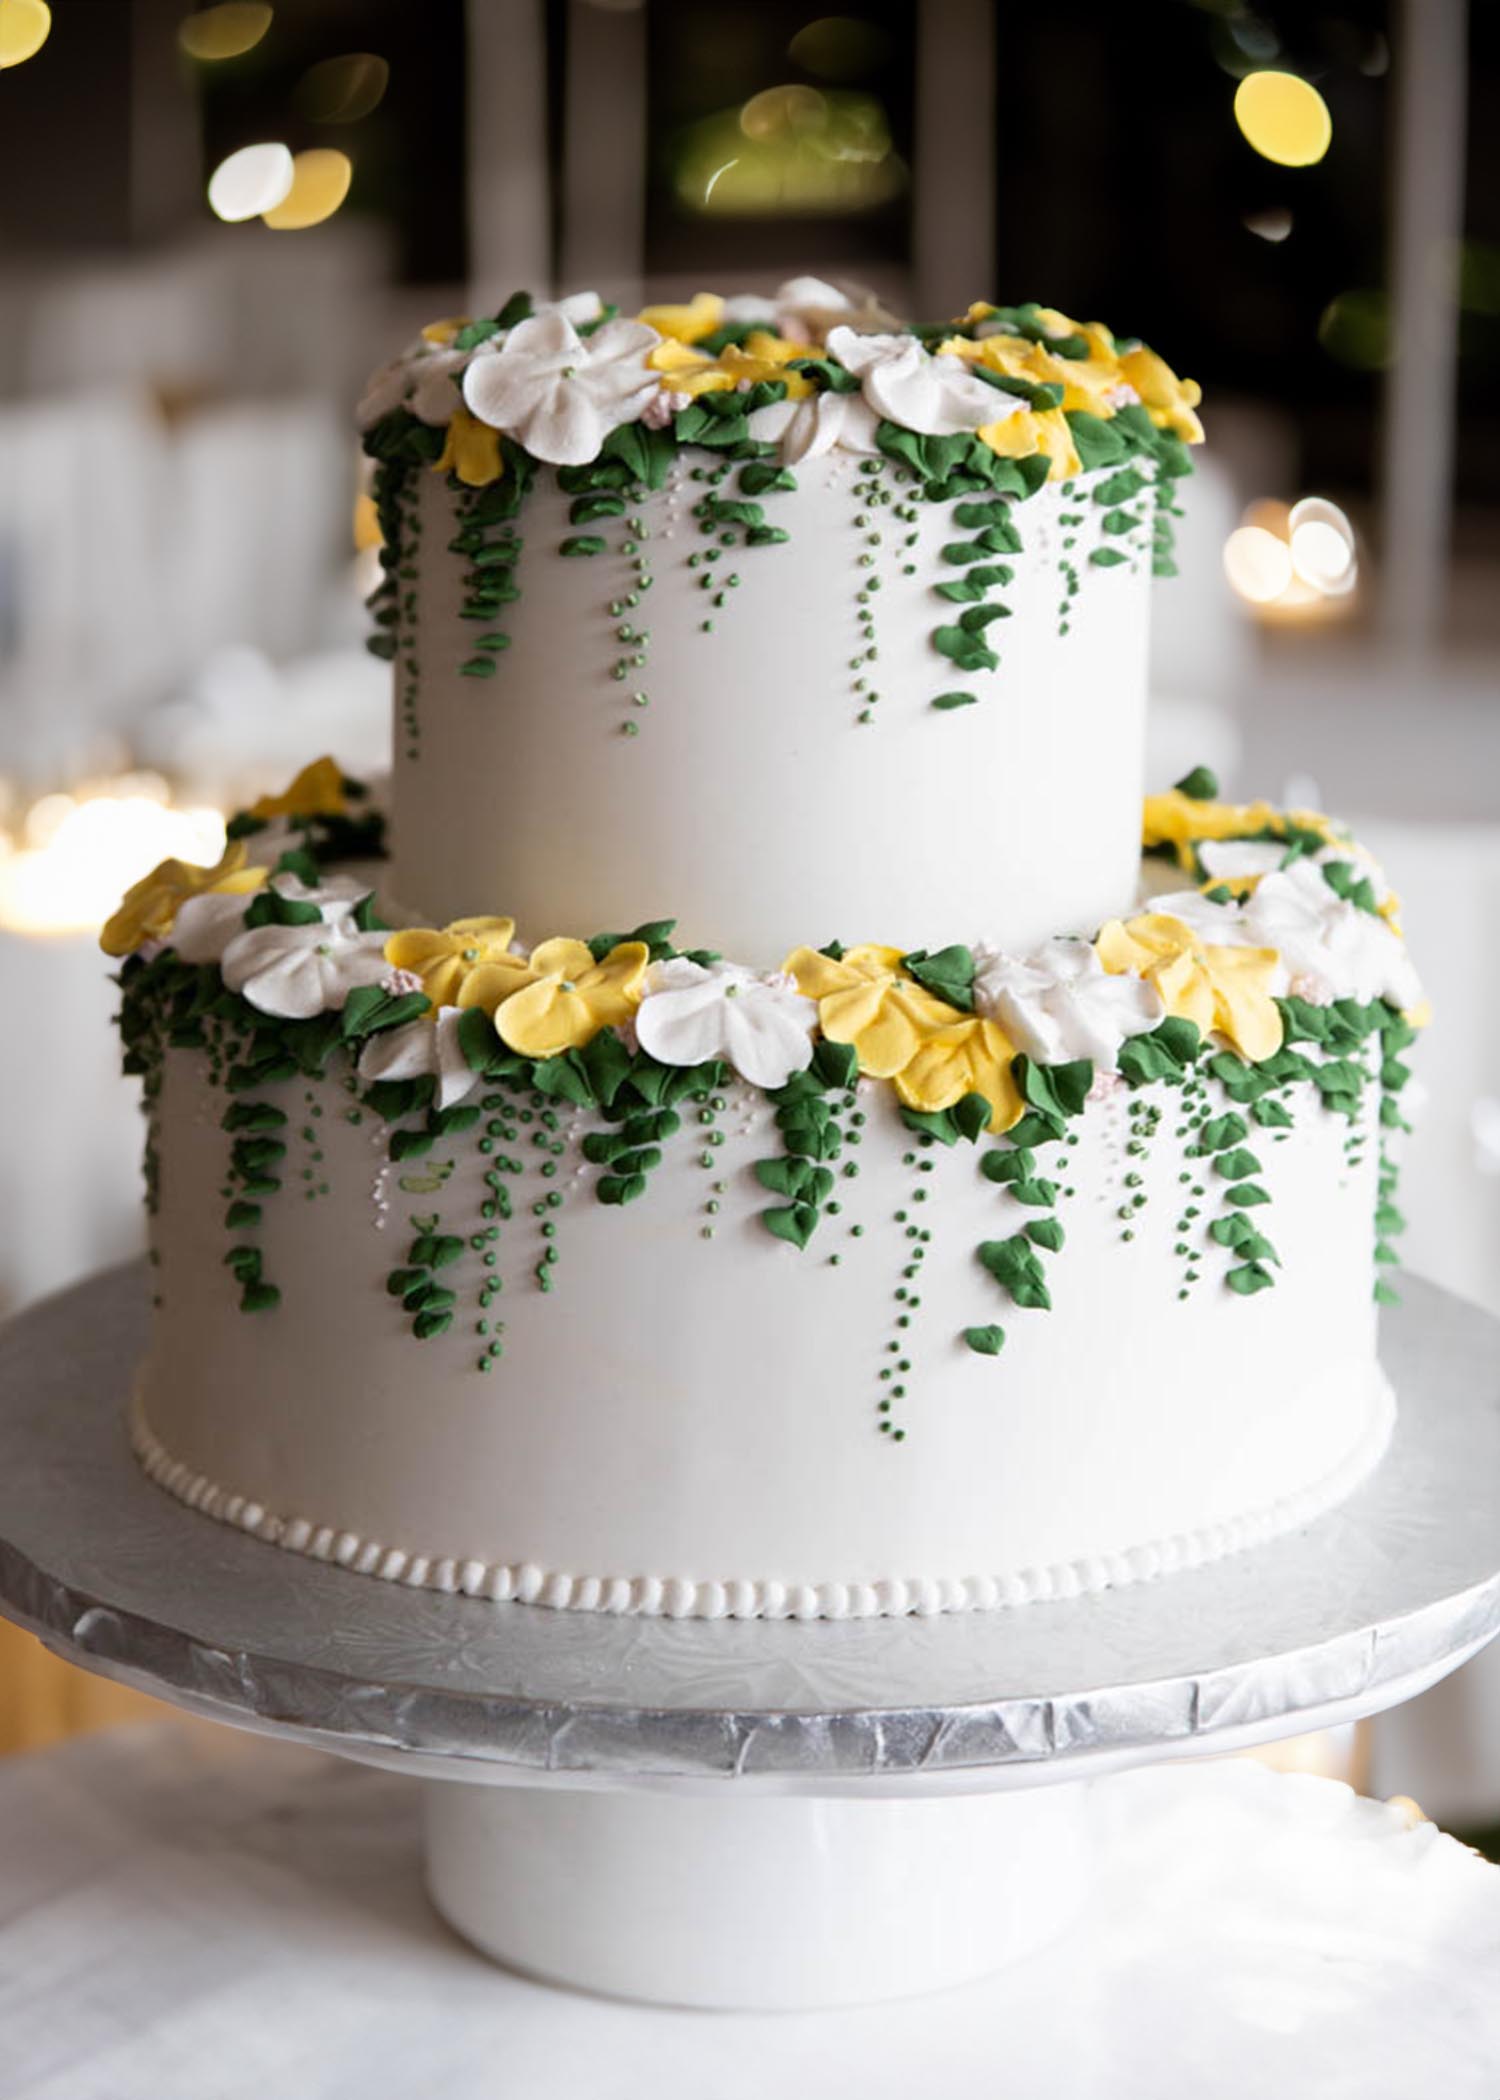 Specialty Cake Images